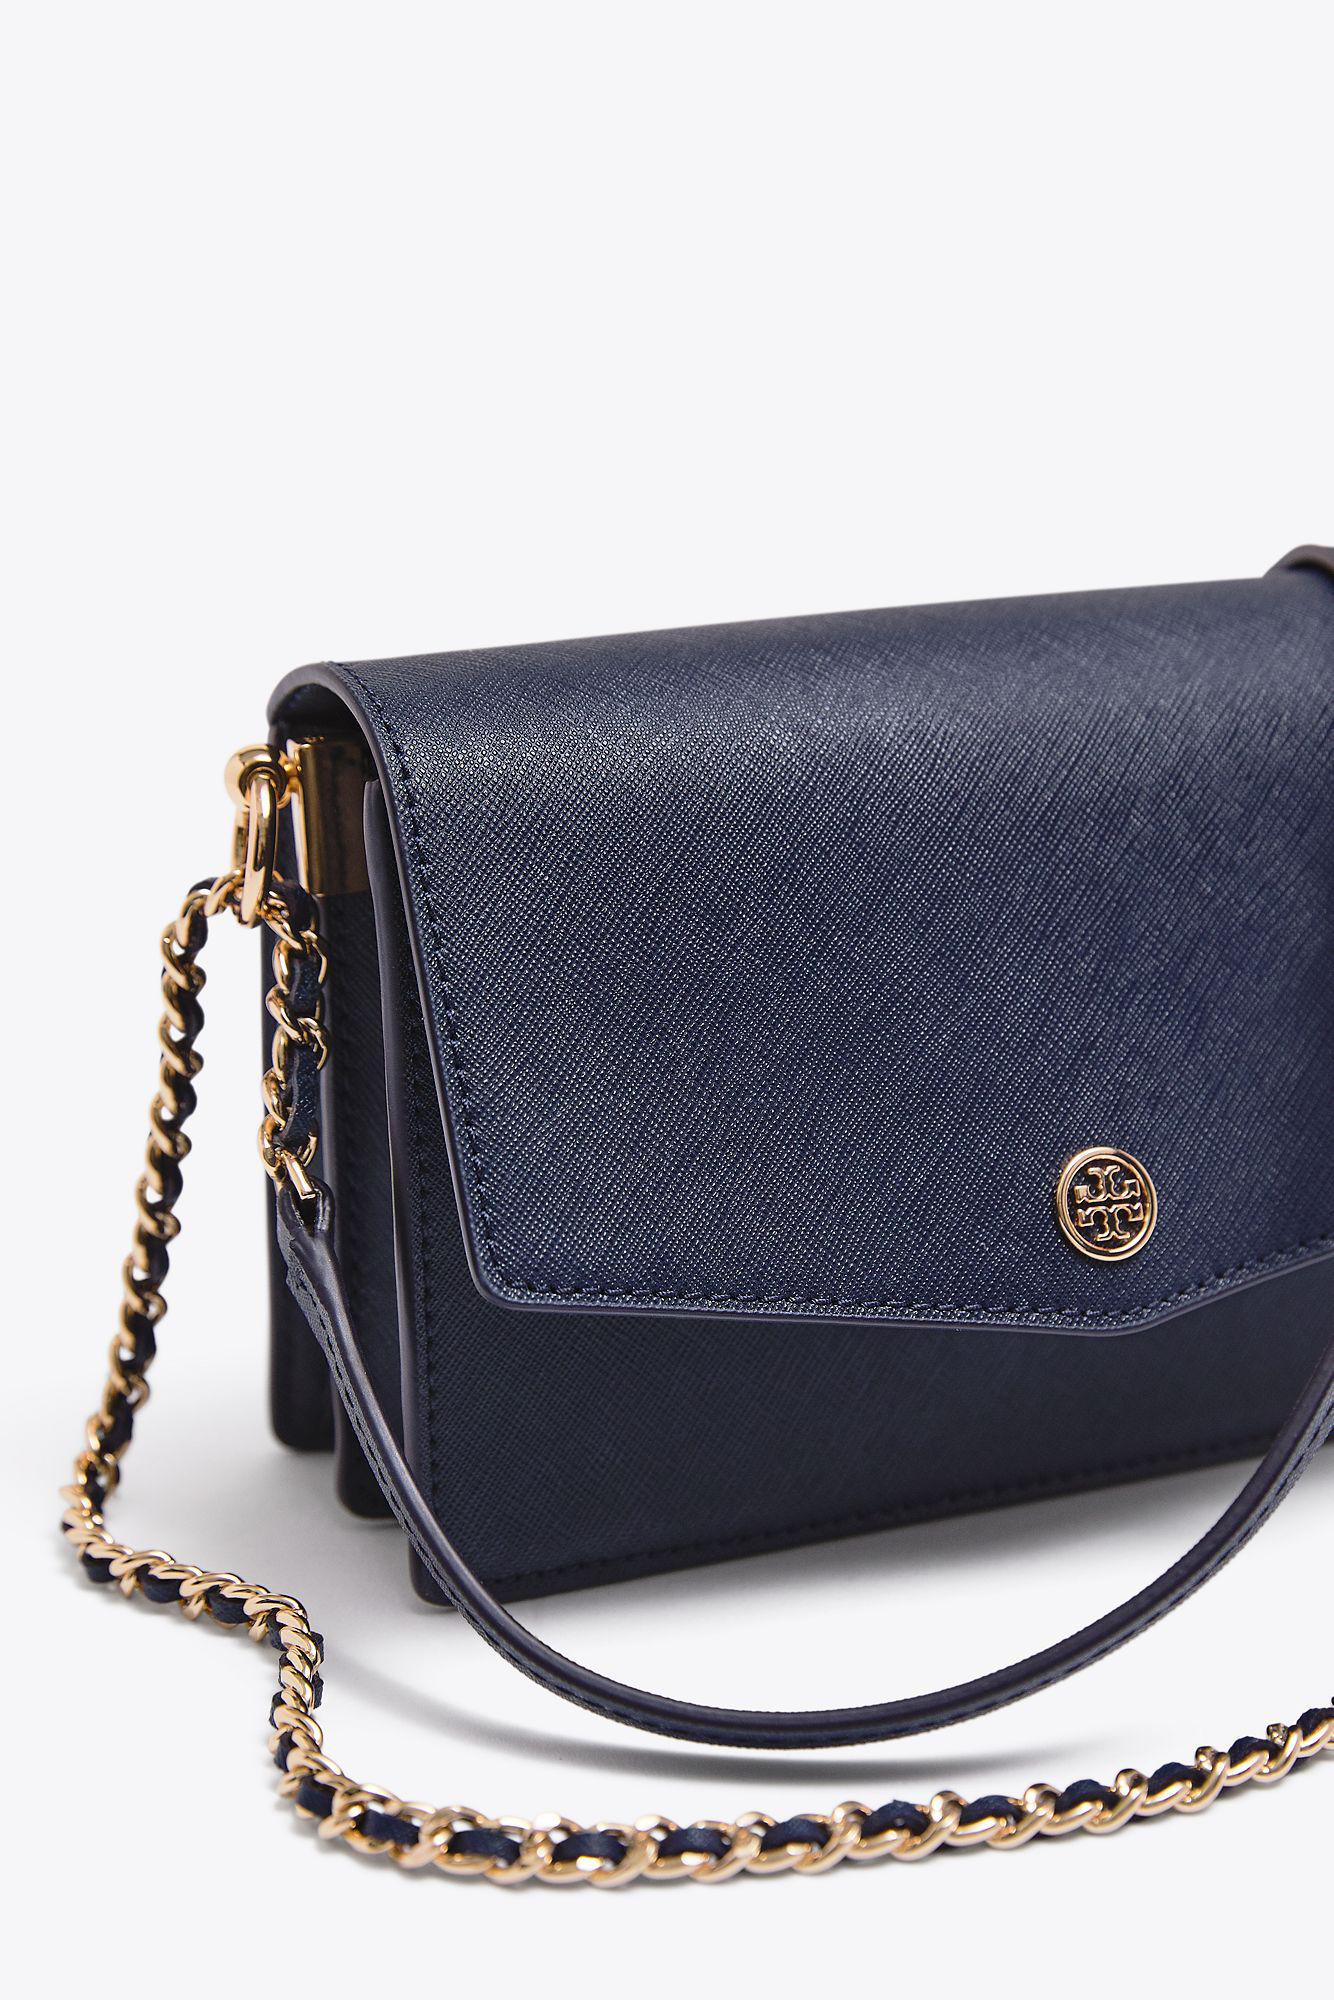 Tory Burch Leather Robinson Convertible Mini Shoulder Bag in Blue - Lyst